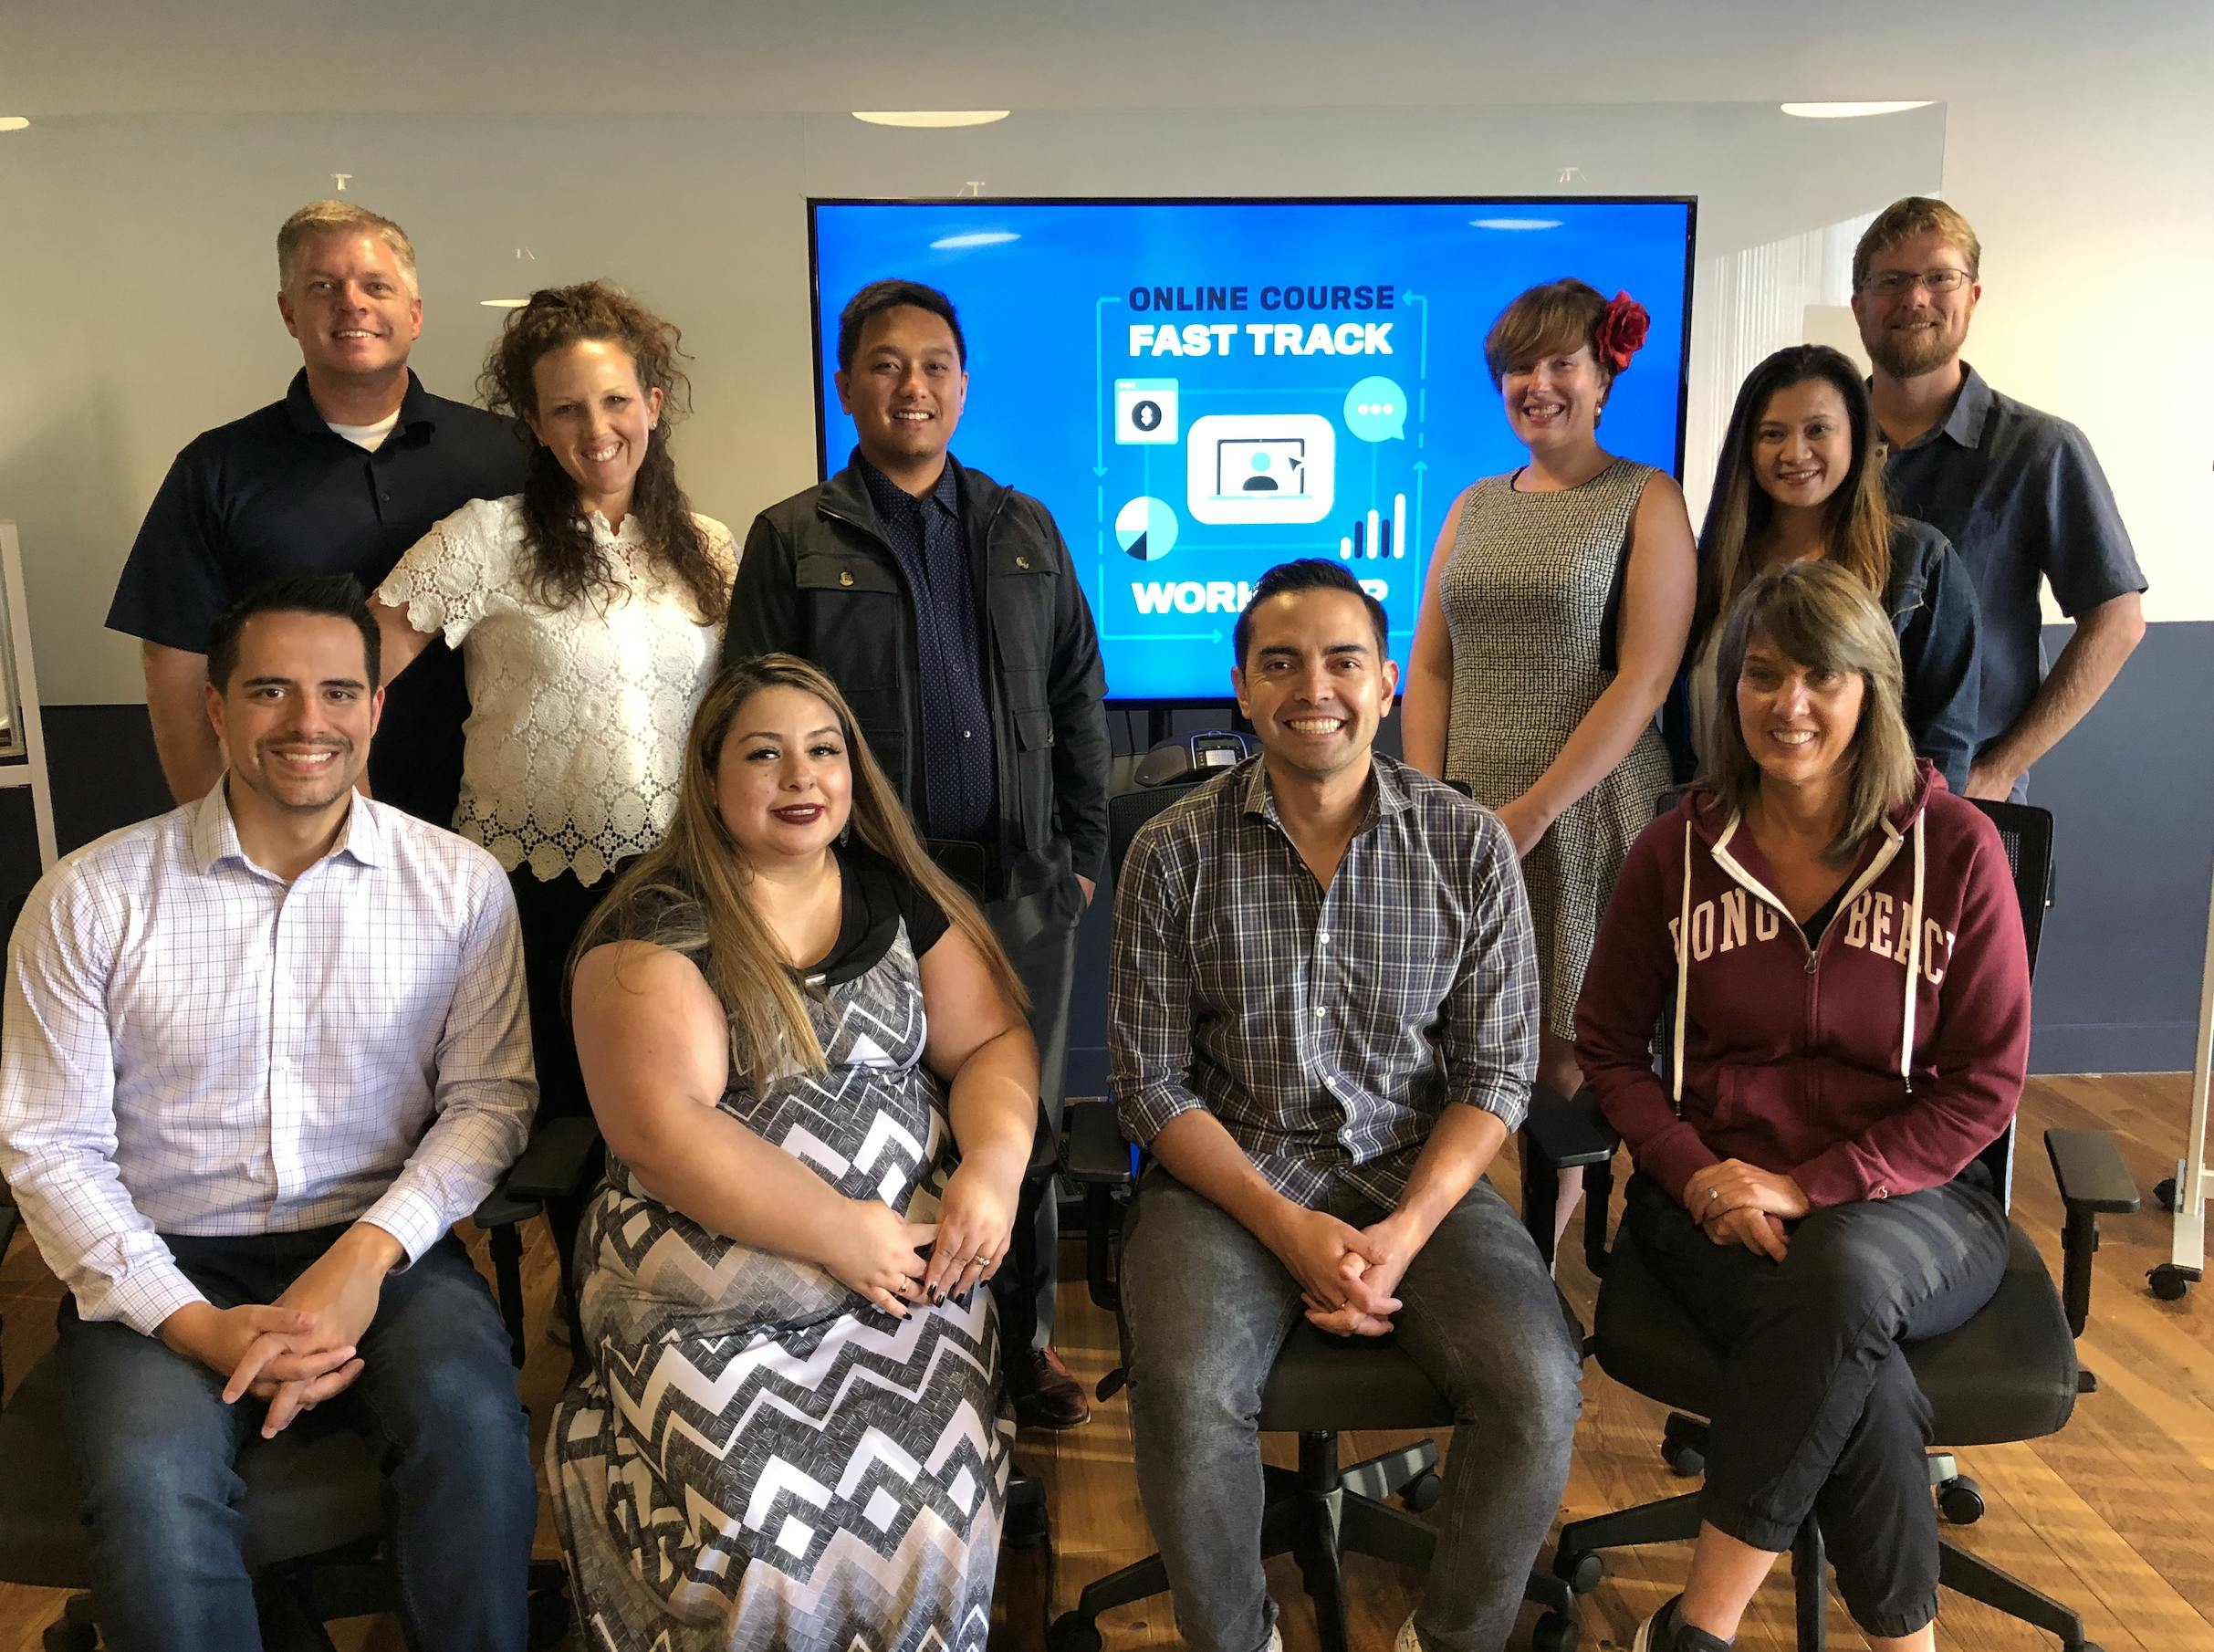 A group picture from the in person Online Course Fast-Track Workshop in San Diego, CA in October, 2019.